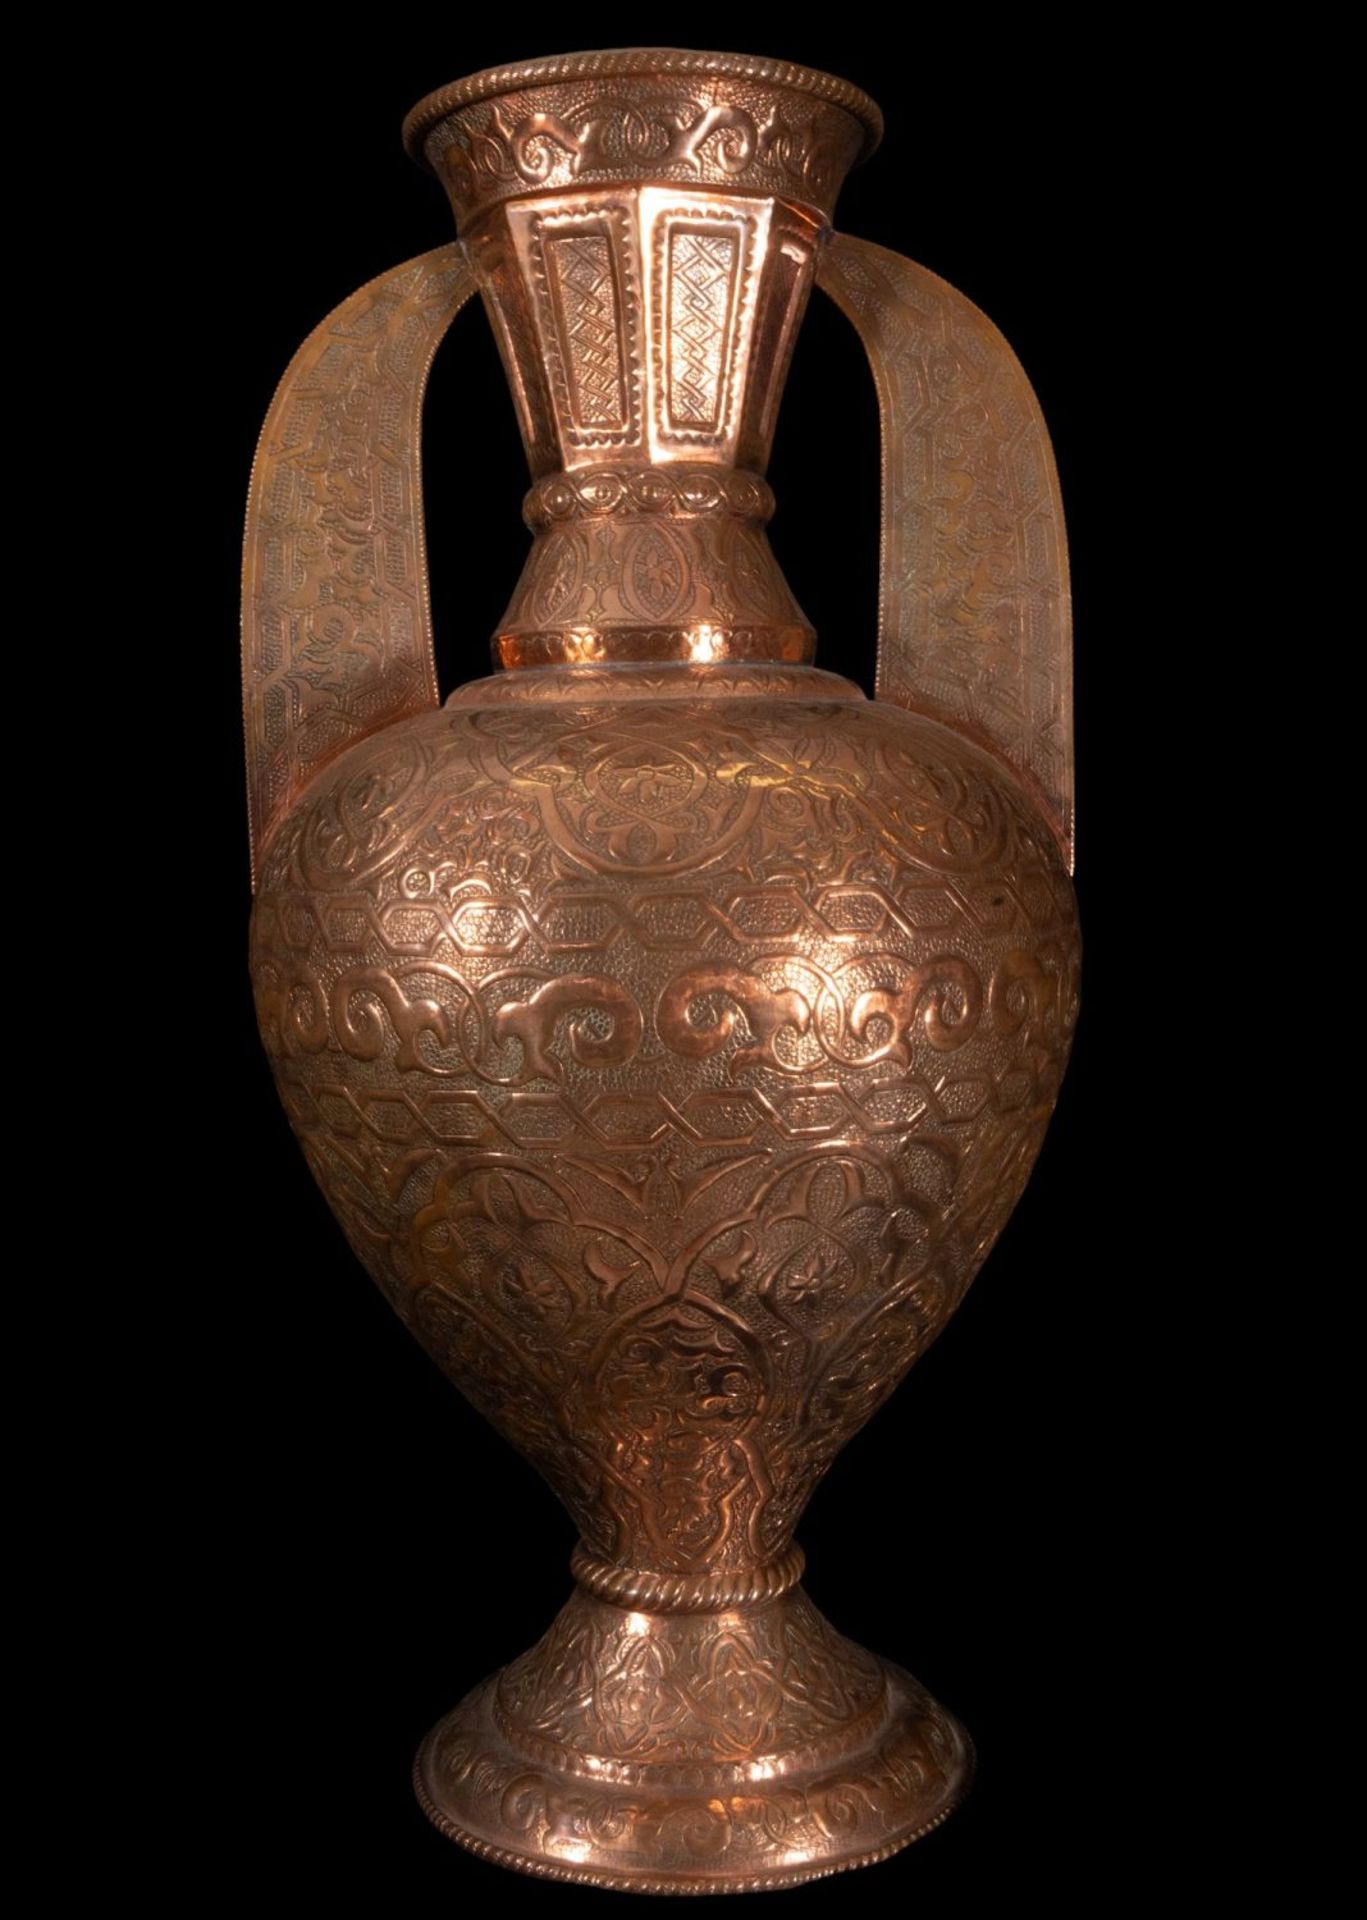 Pair of Large Embossed Copper Vases in the "Alhambra" style, Andalusian Granada work from the 19th c - Bild 4 aus 10